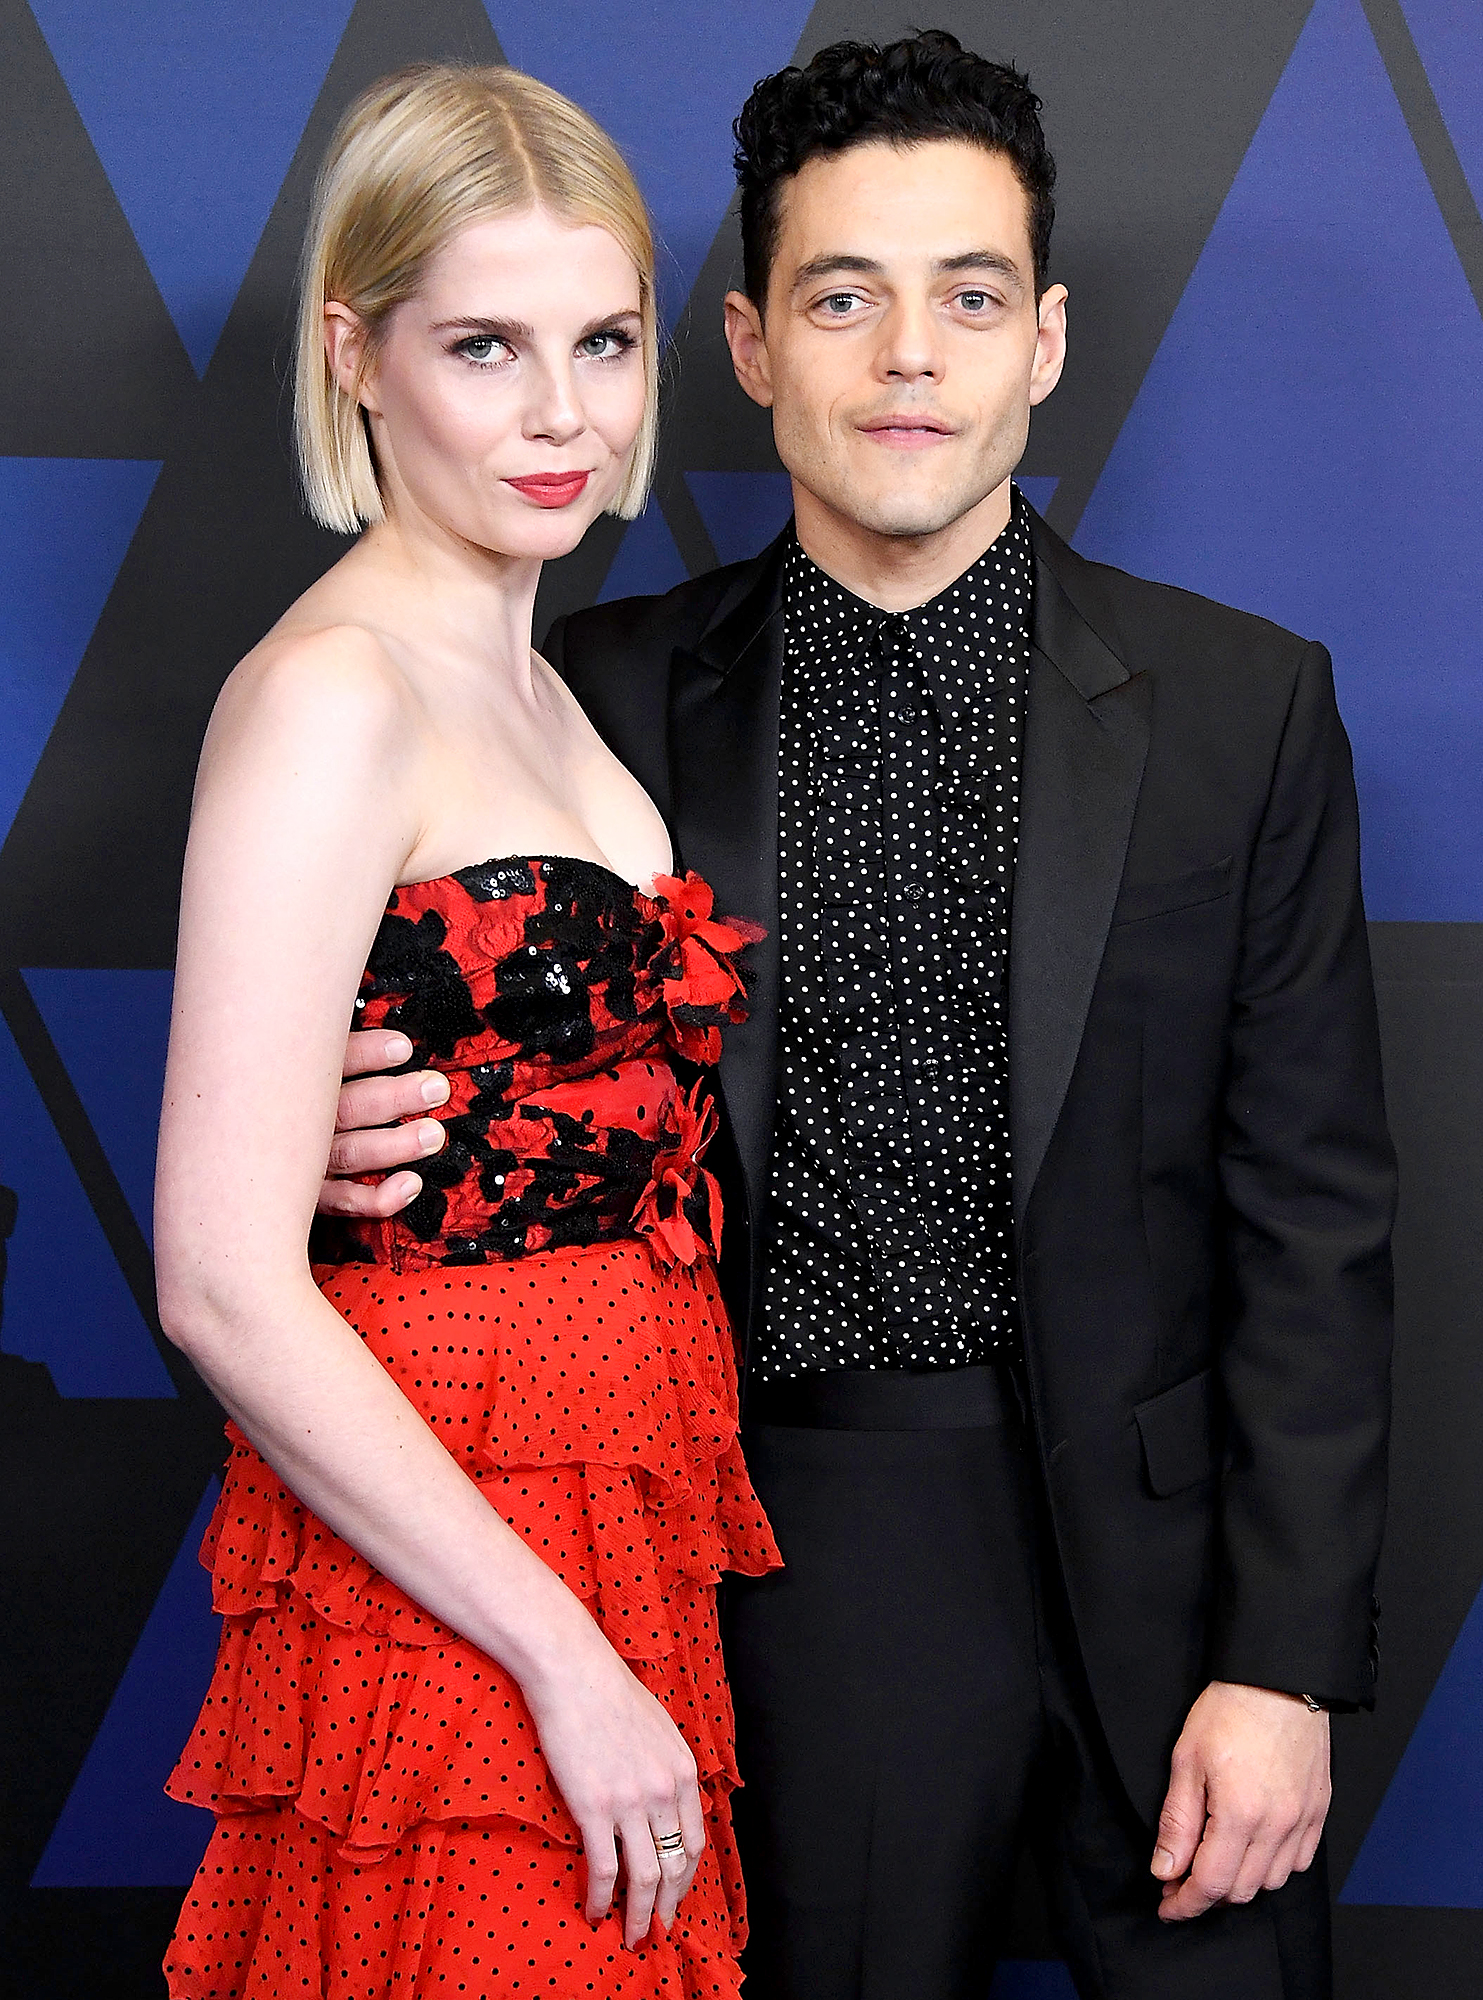 Rami Malek Confirms His Relationship With Lucy Boynton pic image